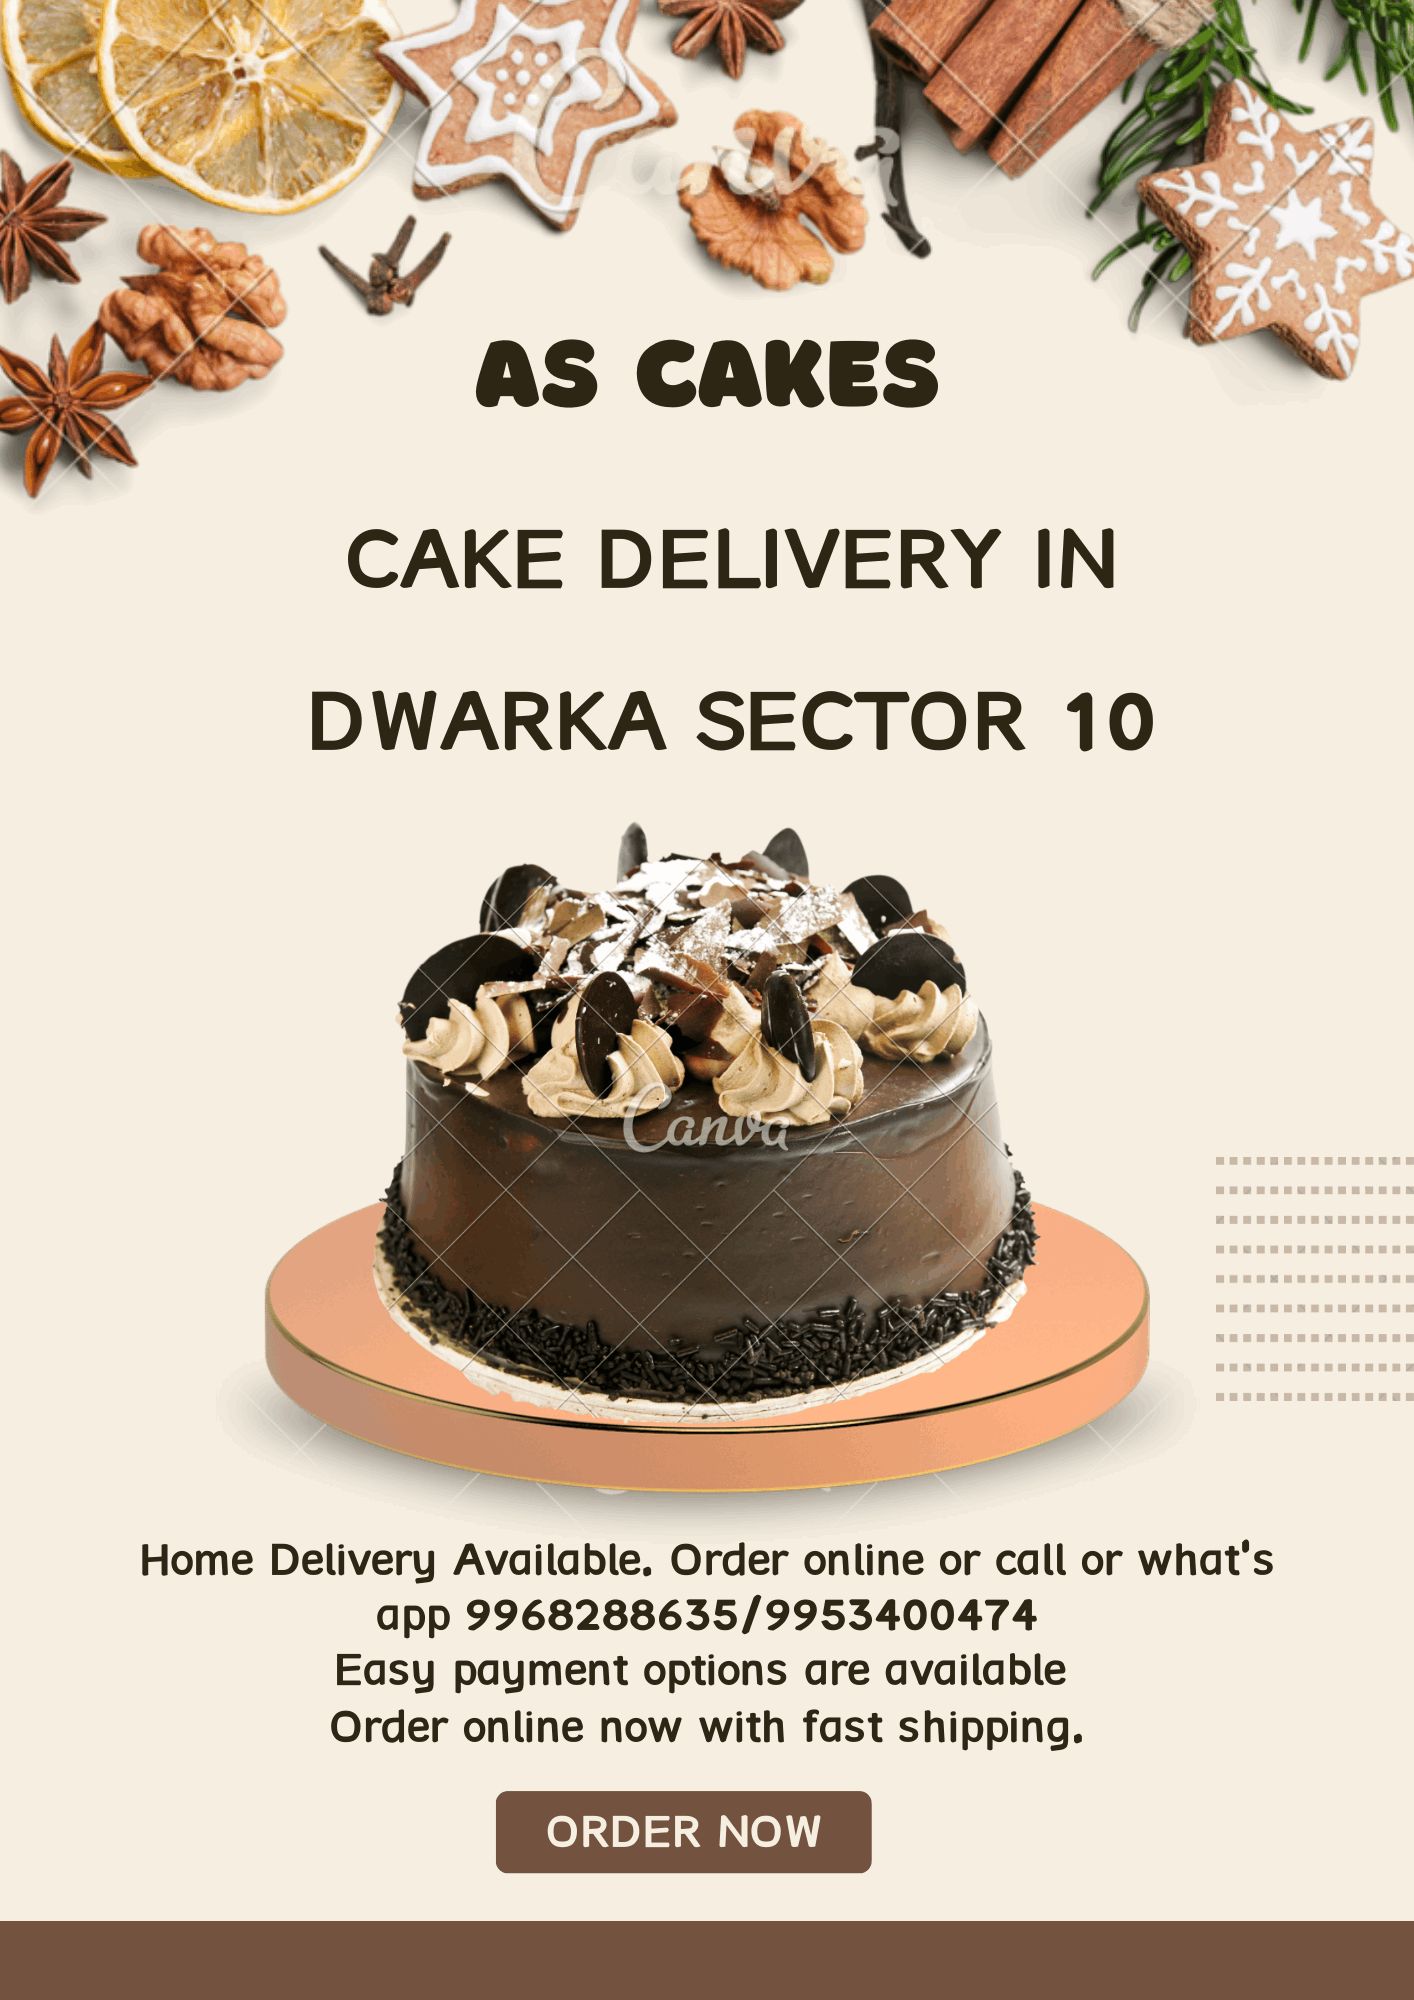 AS CAKES CAKE DELIVERY IN SECTOR 10 DWARKA